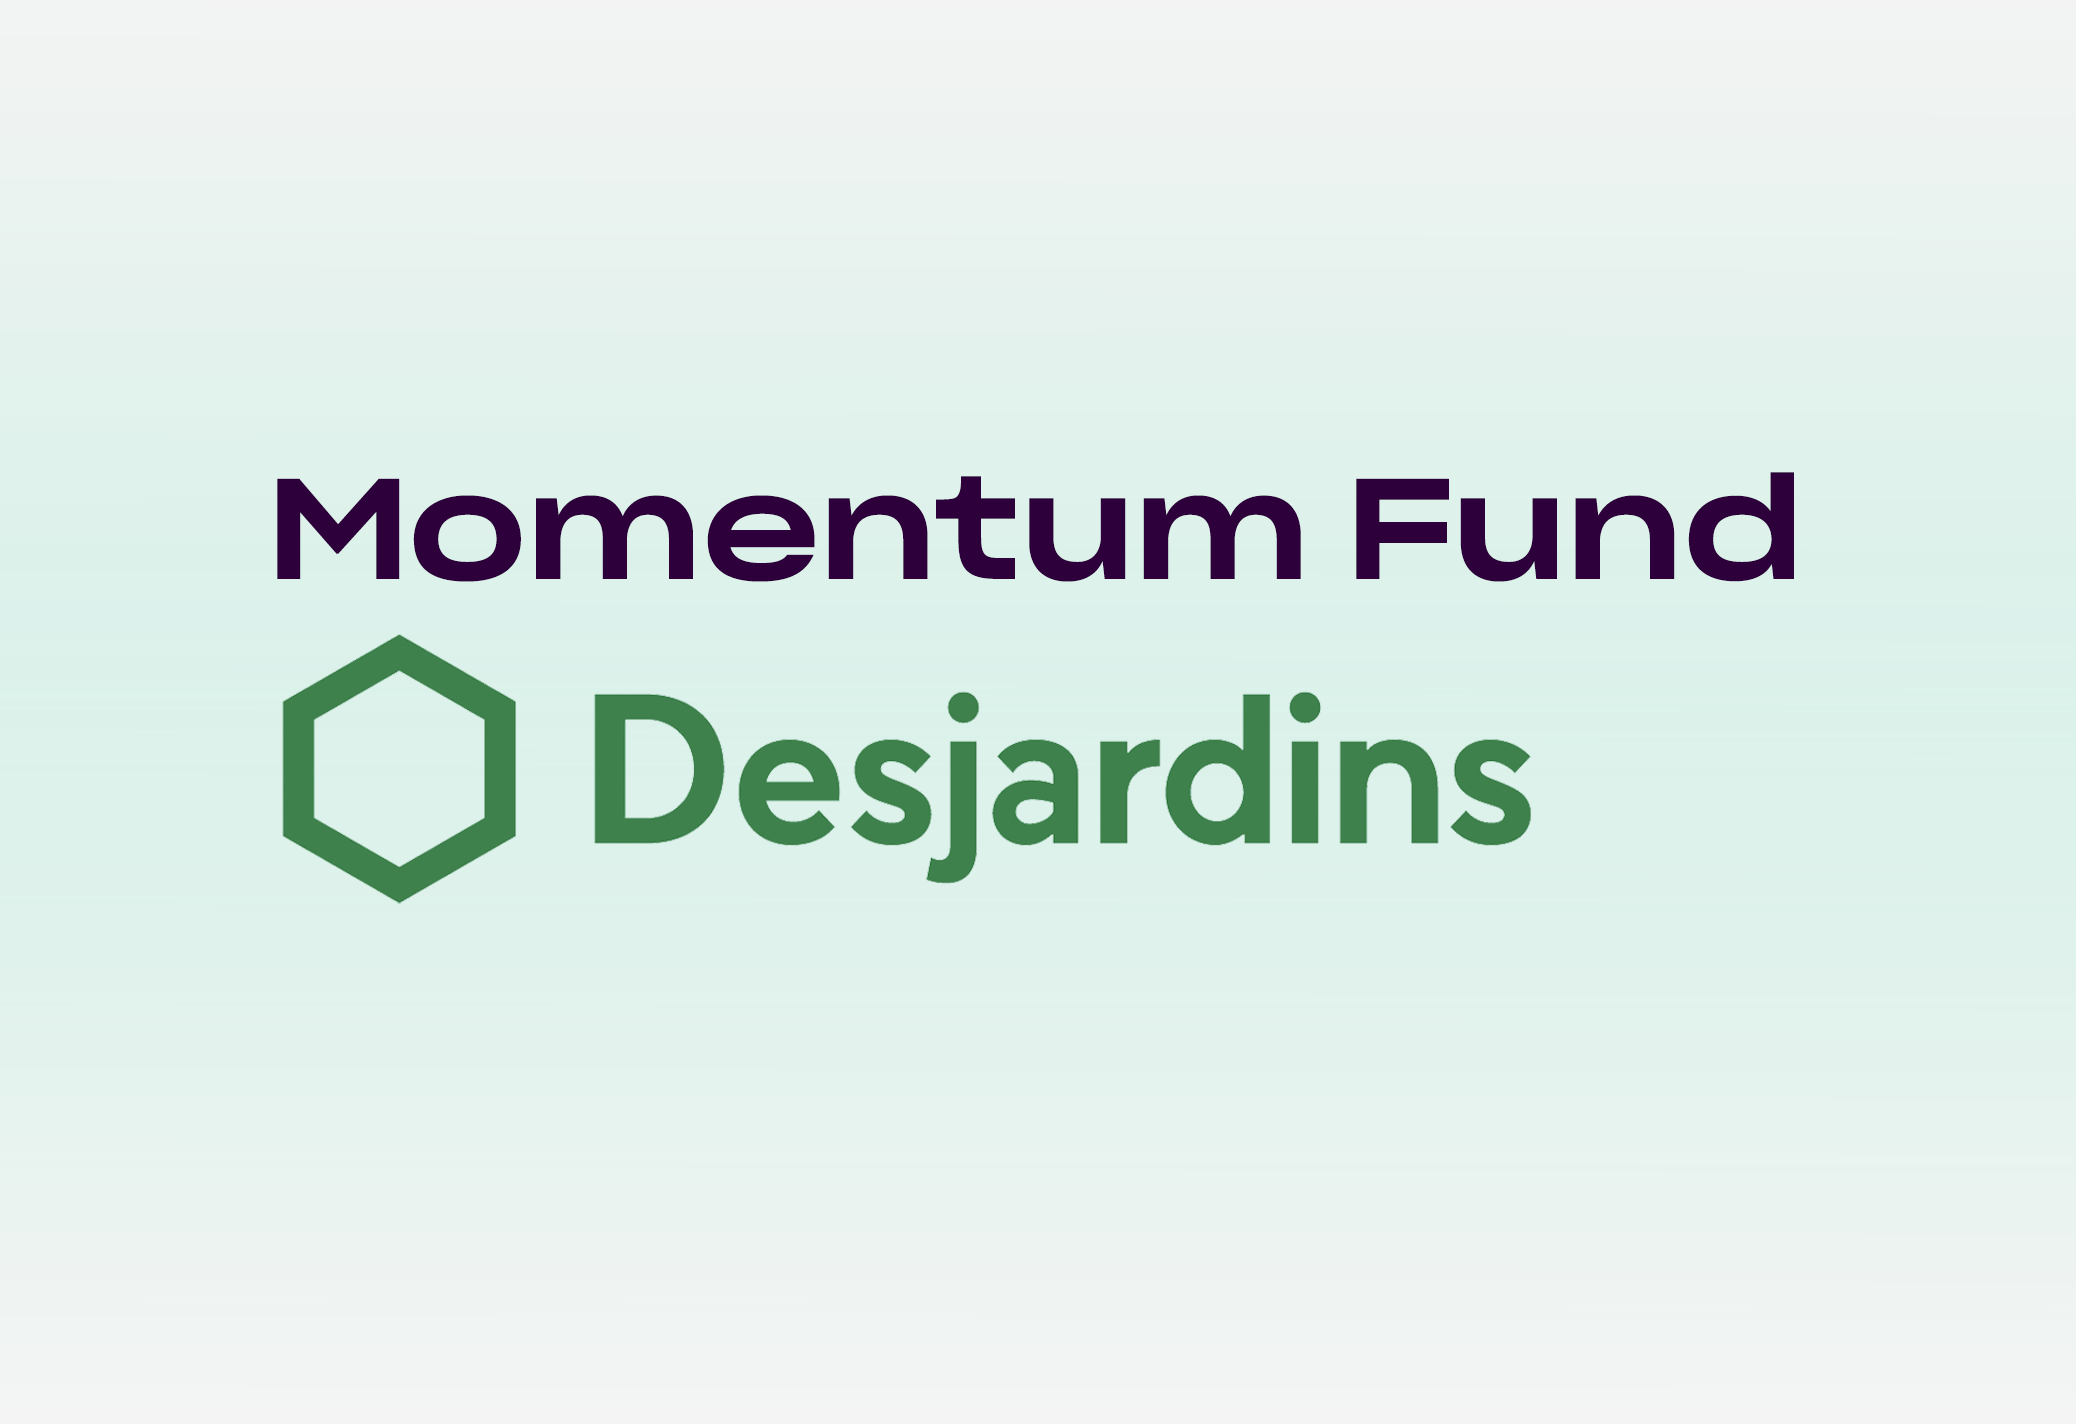 Desjardins’ Momentum Fund:<br>Up to $10,000 to Grow Your Business